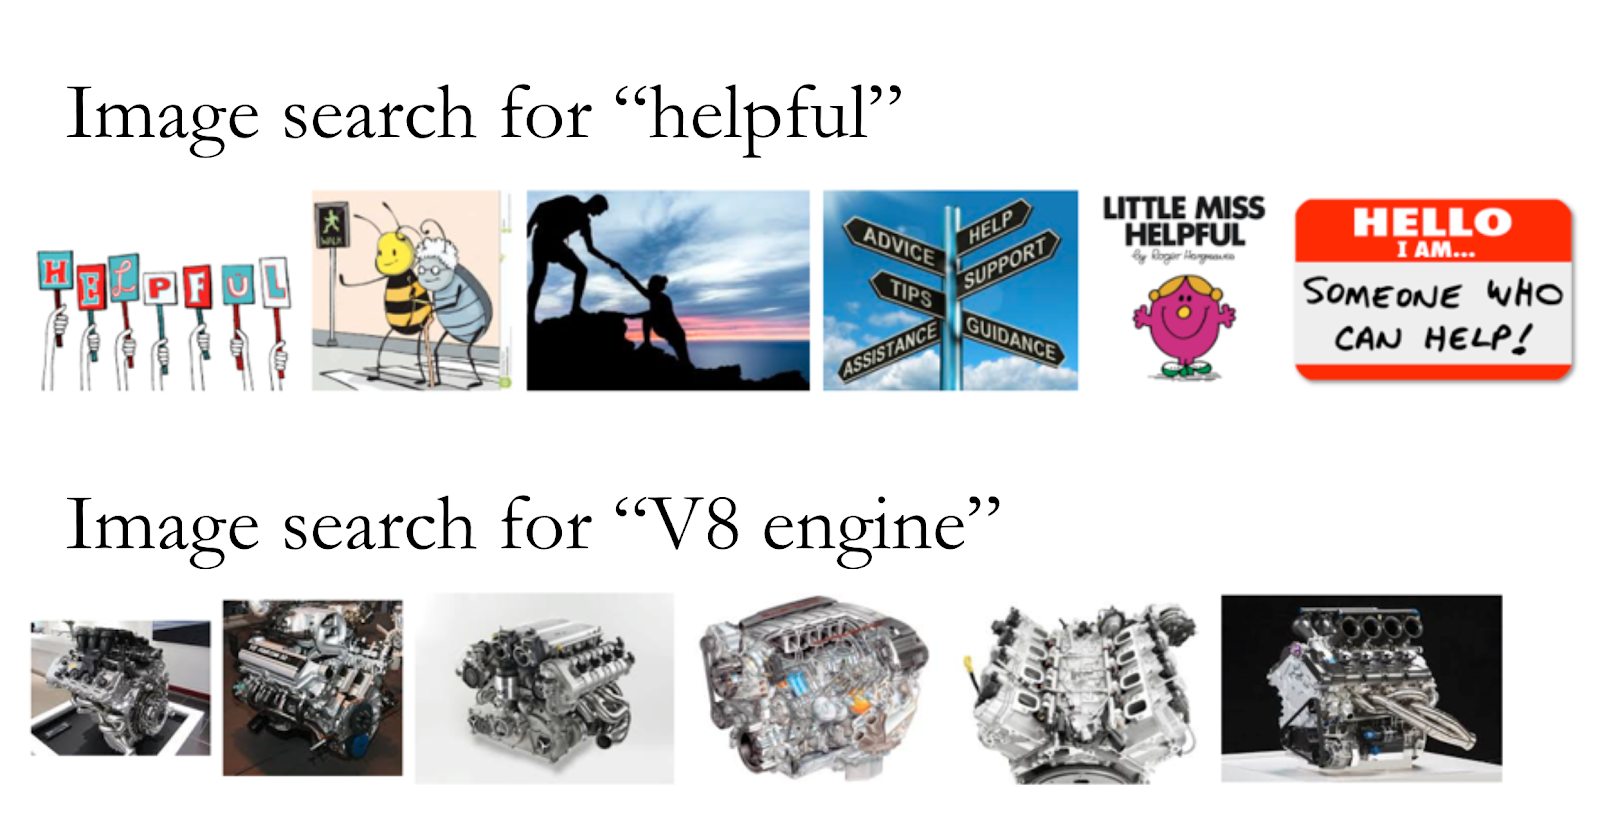 Image search for "helpful" and "v8 engine"